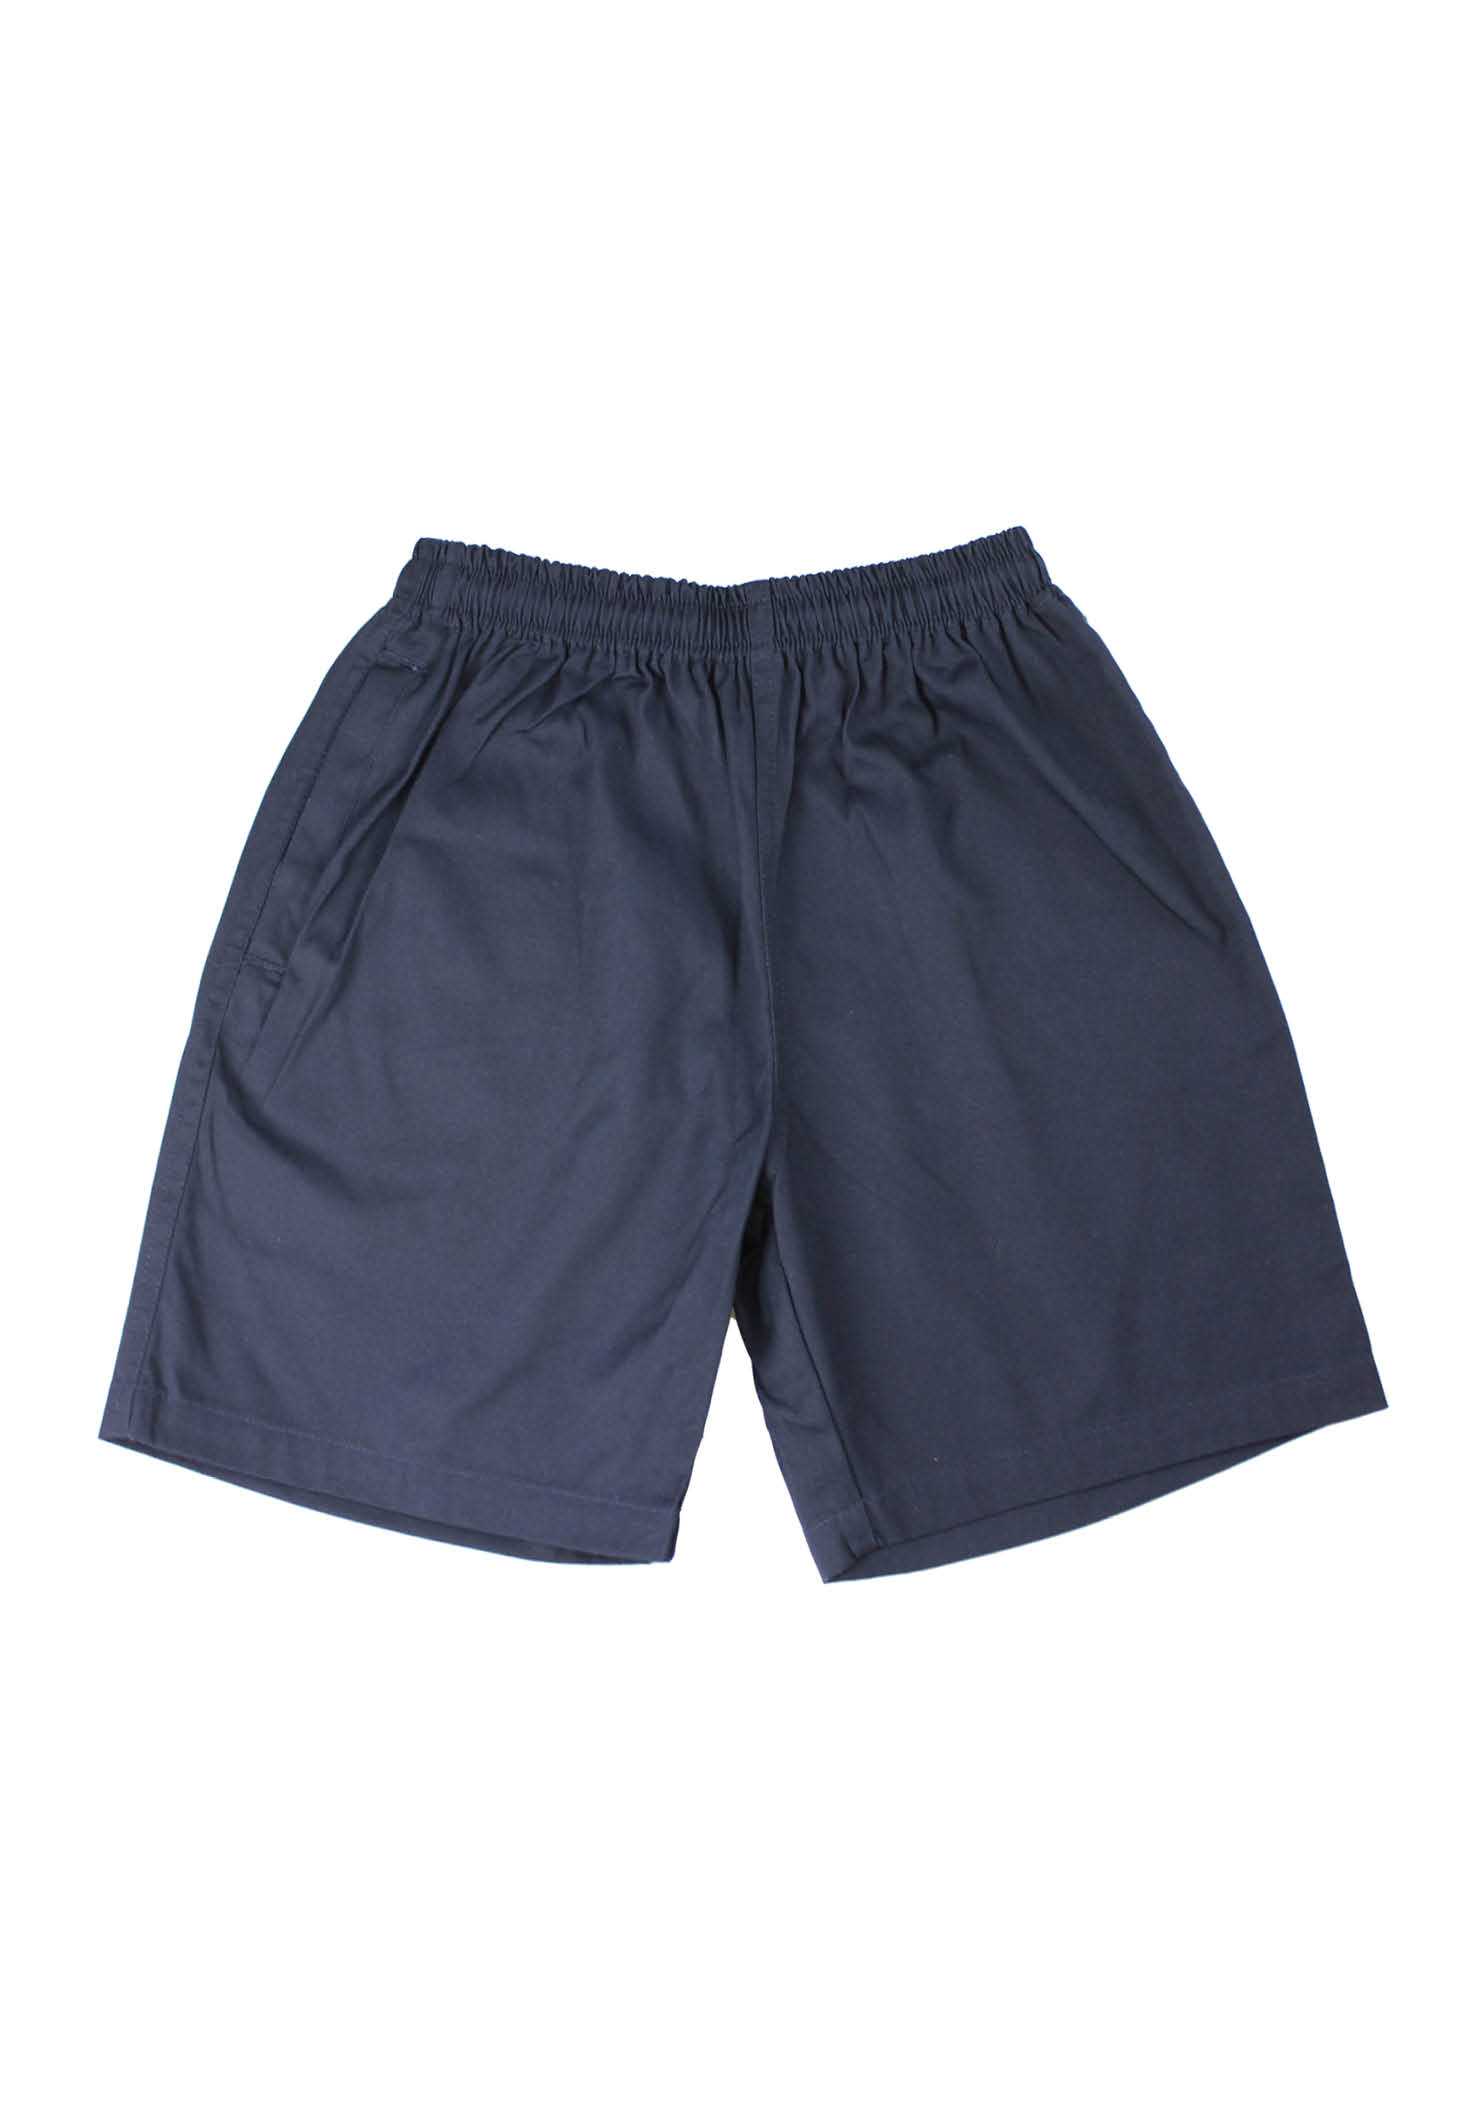 Canterbury Navy Cotton Twill Shorts | Shop at Pickles Schoolwear ...